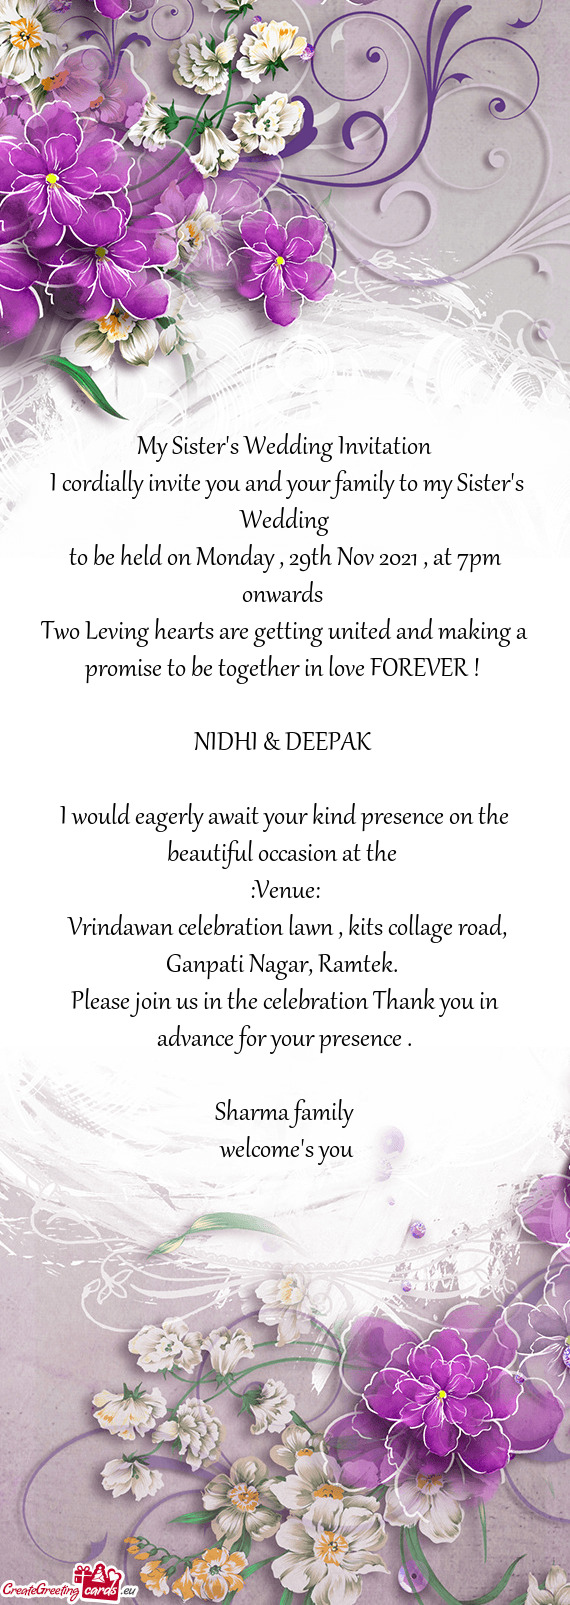 To be held on Monday , 29th Nov 2021 , at 7pm onwards